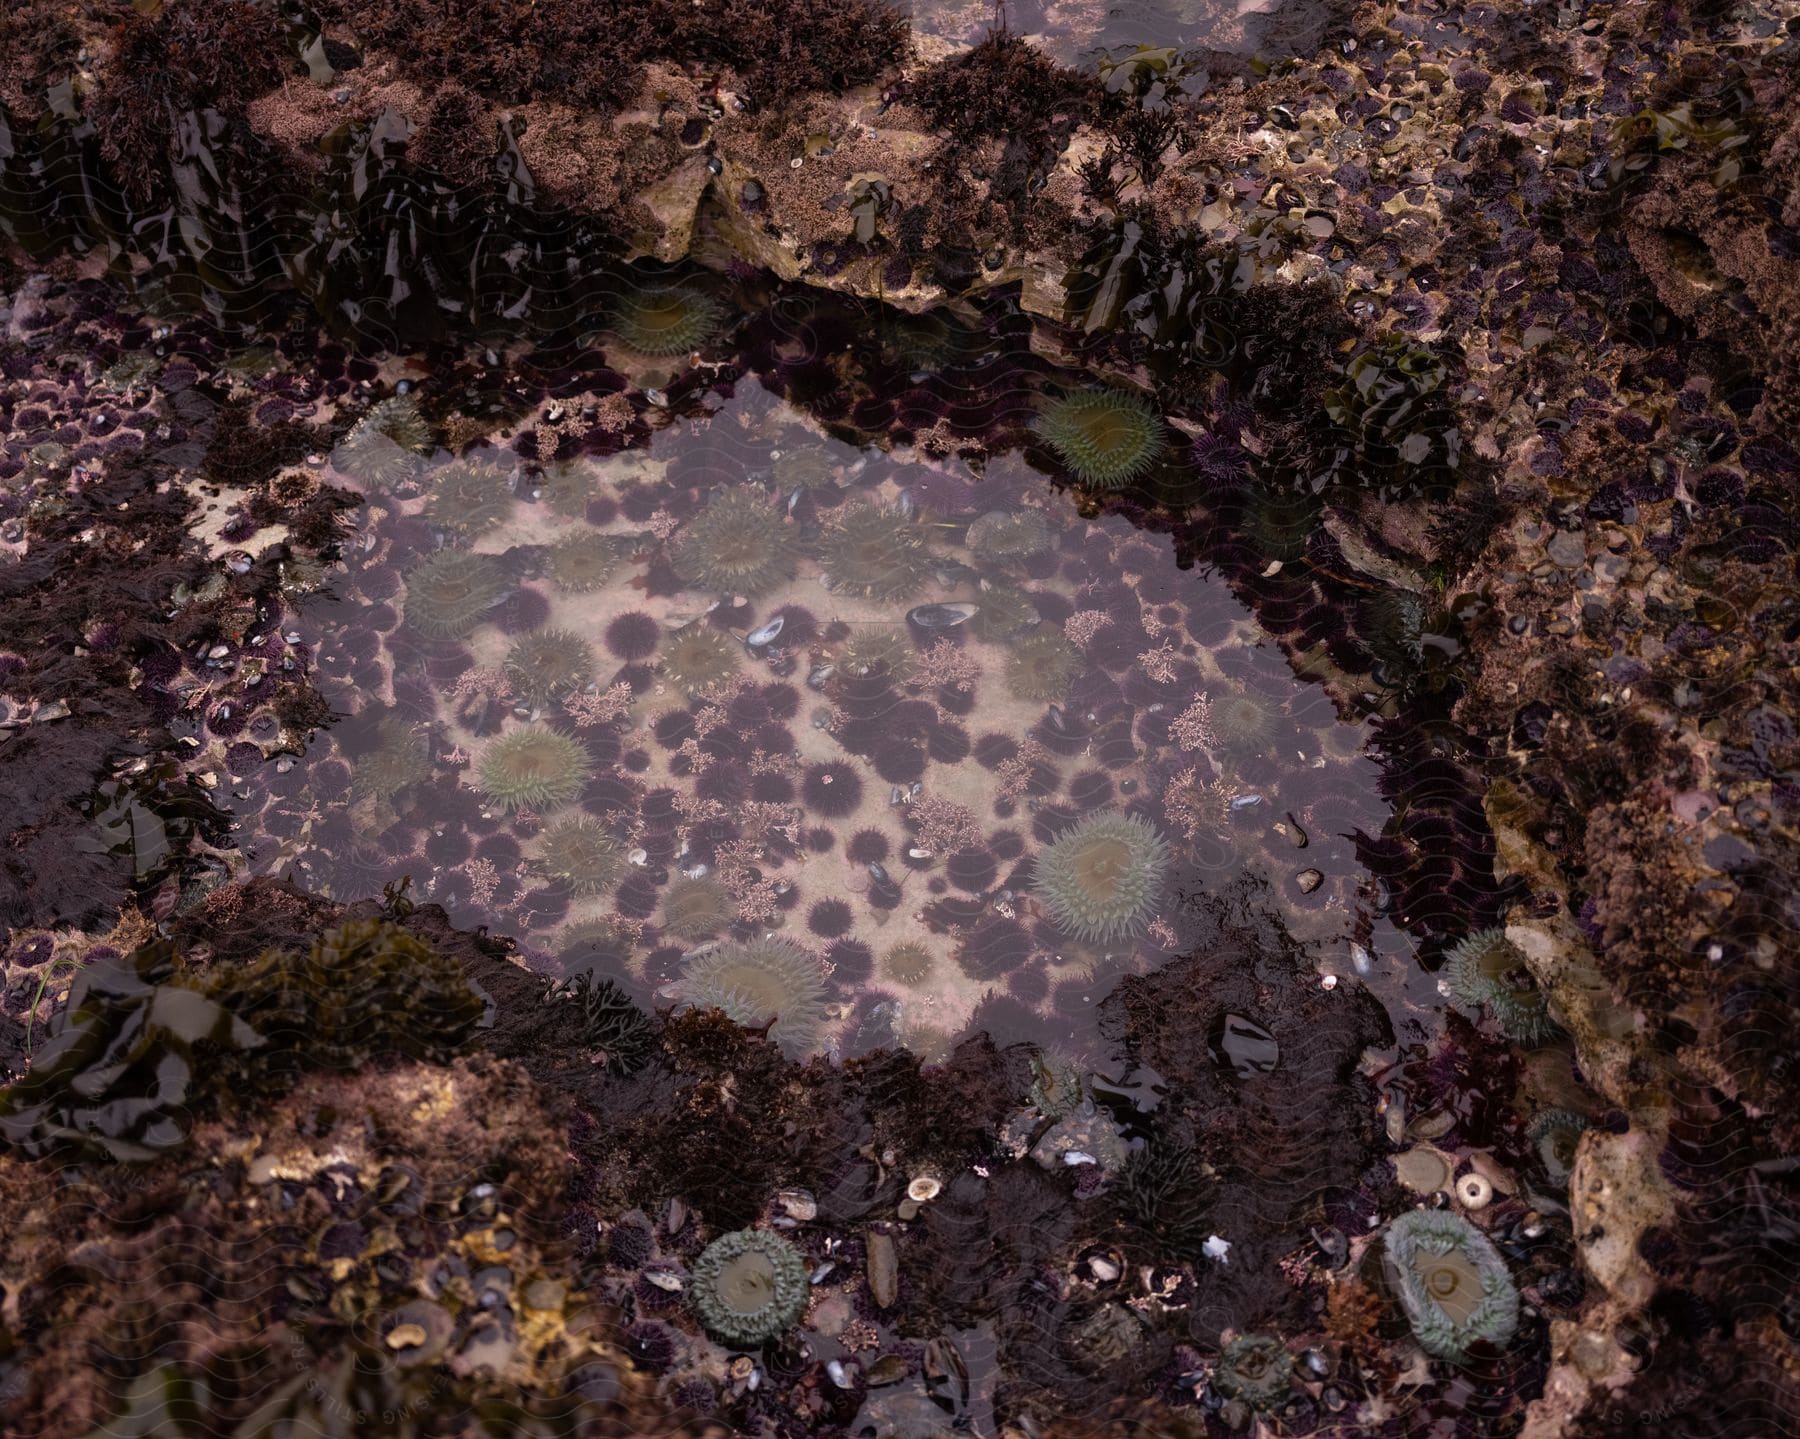 A rock pool filled with sea anemones and sea urchins.